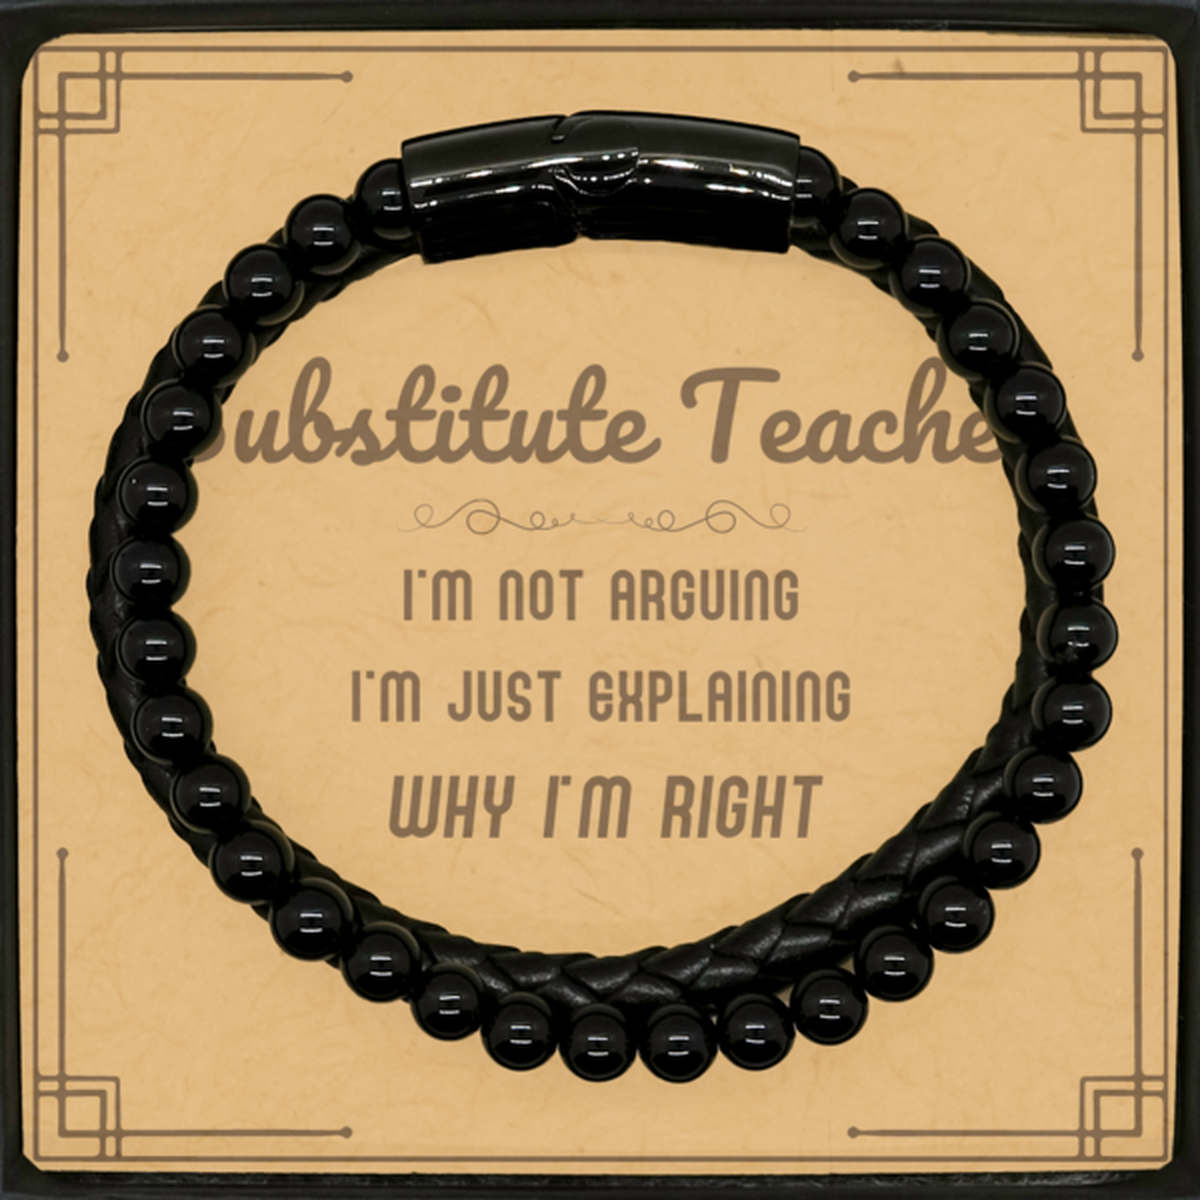 Substitute Teacher I'm not Arguing. I'm Just Explaining Why I'm RIGHT Stone Leather Bracelets, Funny Saying Quote Substitute Teacher Gifts For Substitute Teacher Message Card Graduation Birthday Christmas Gifts for Men Women Coworker